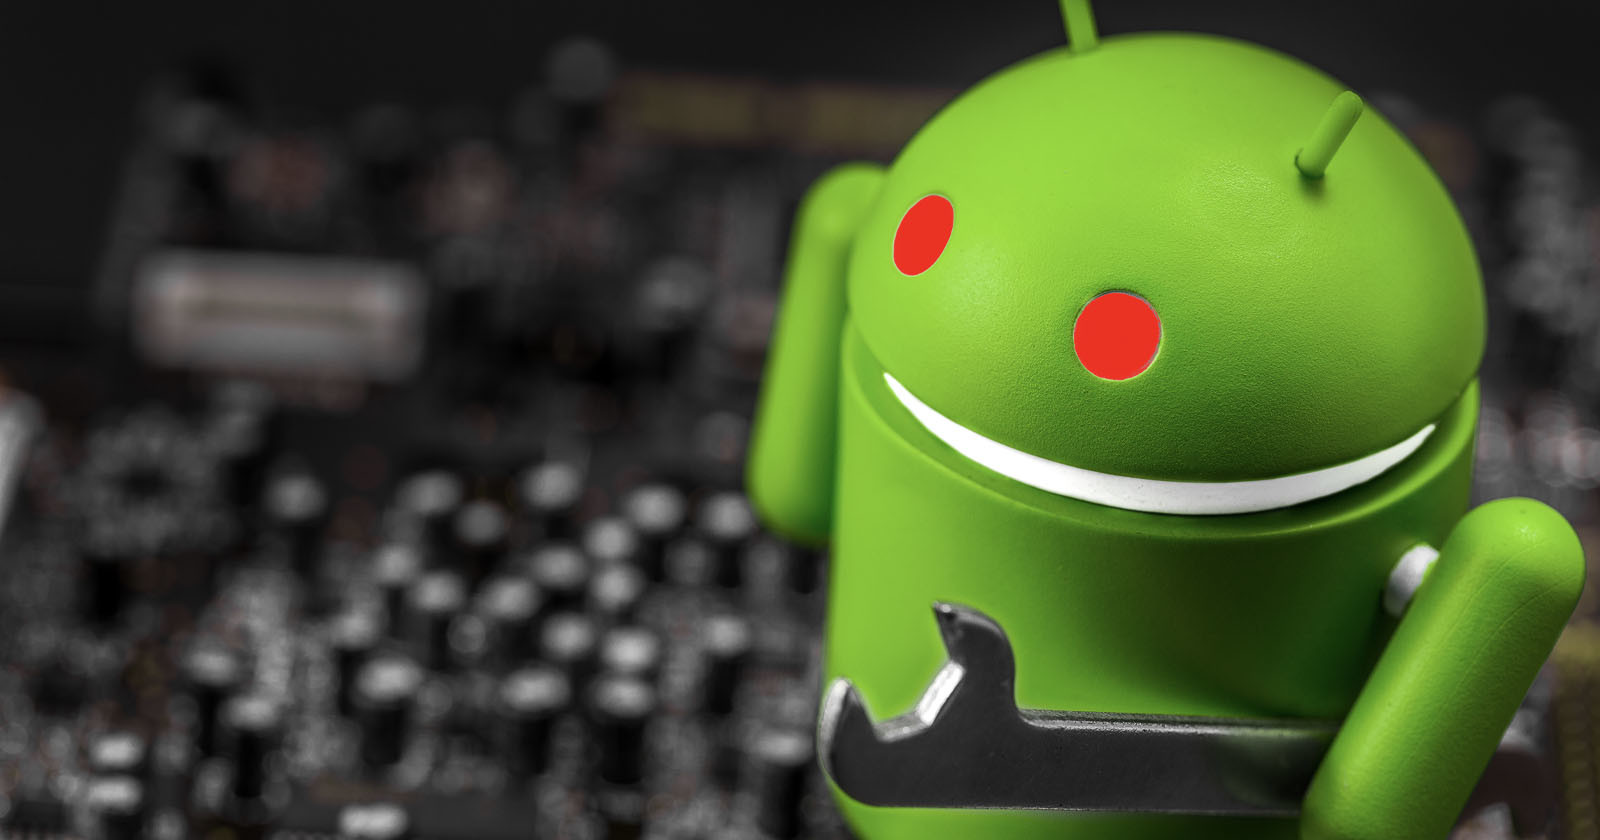 New Russian-Linked Android Spyware Takes Control of Camera and Mics